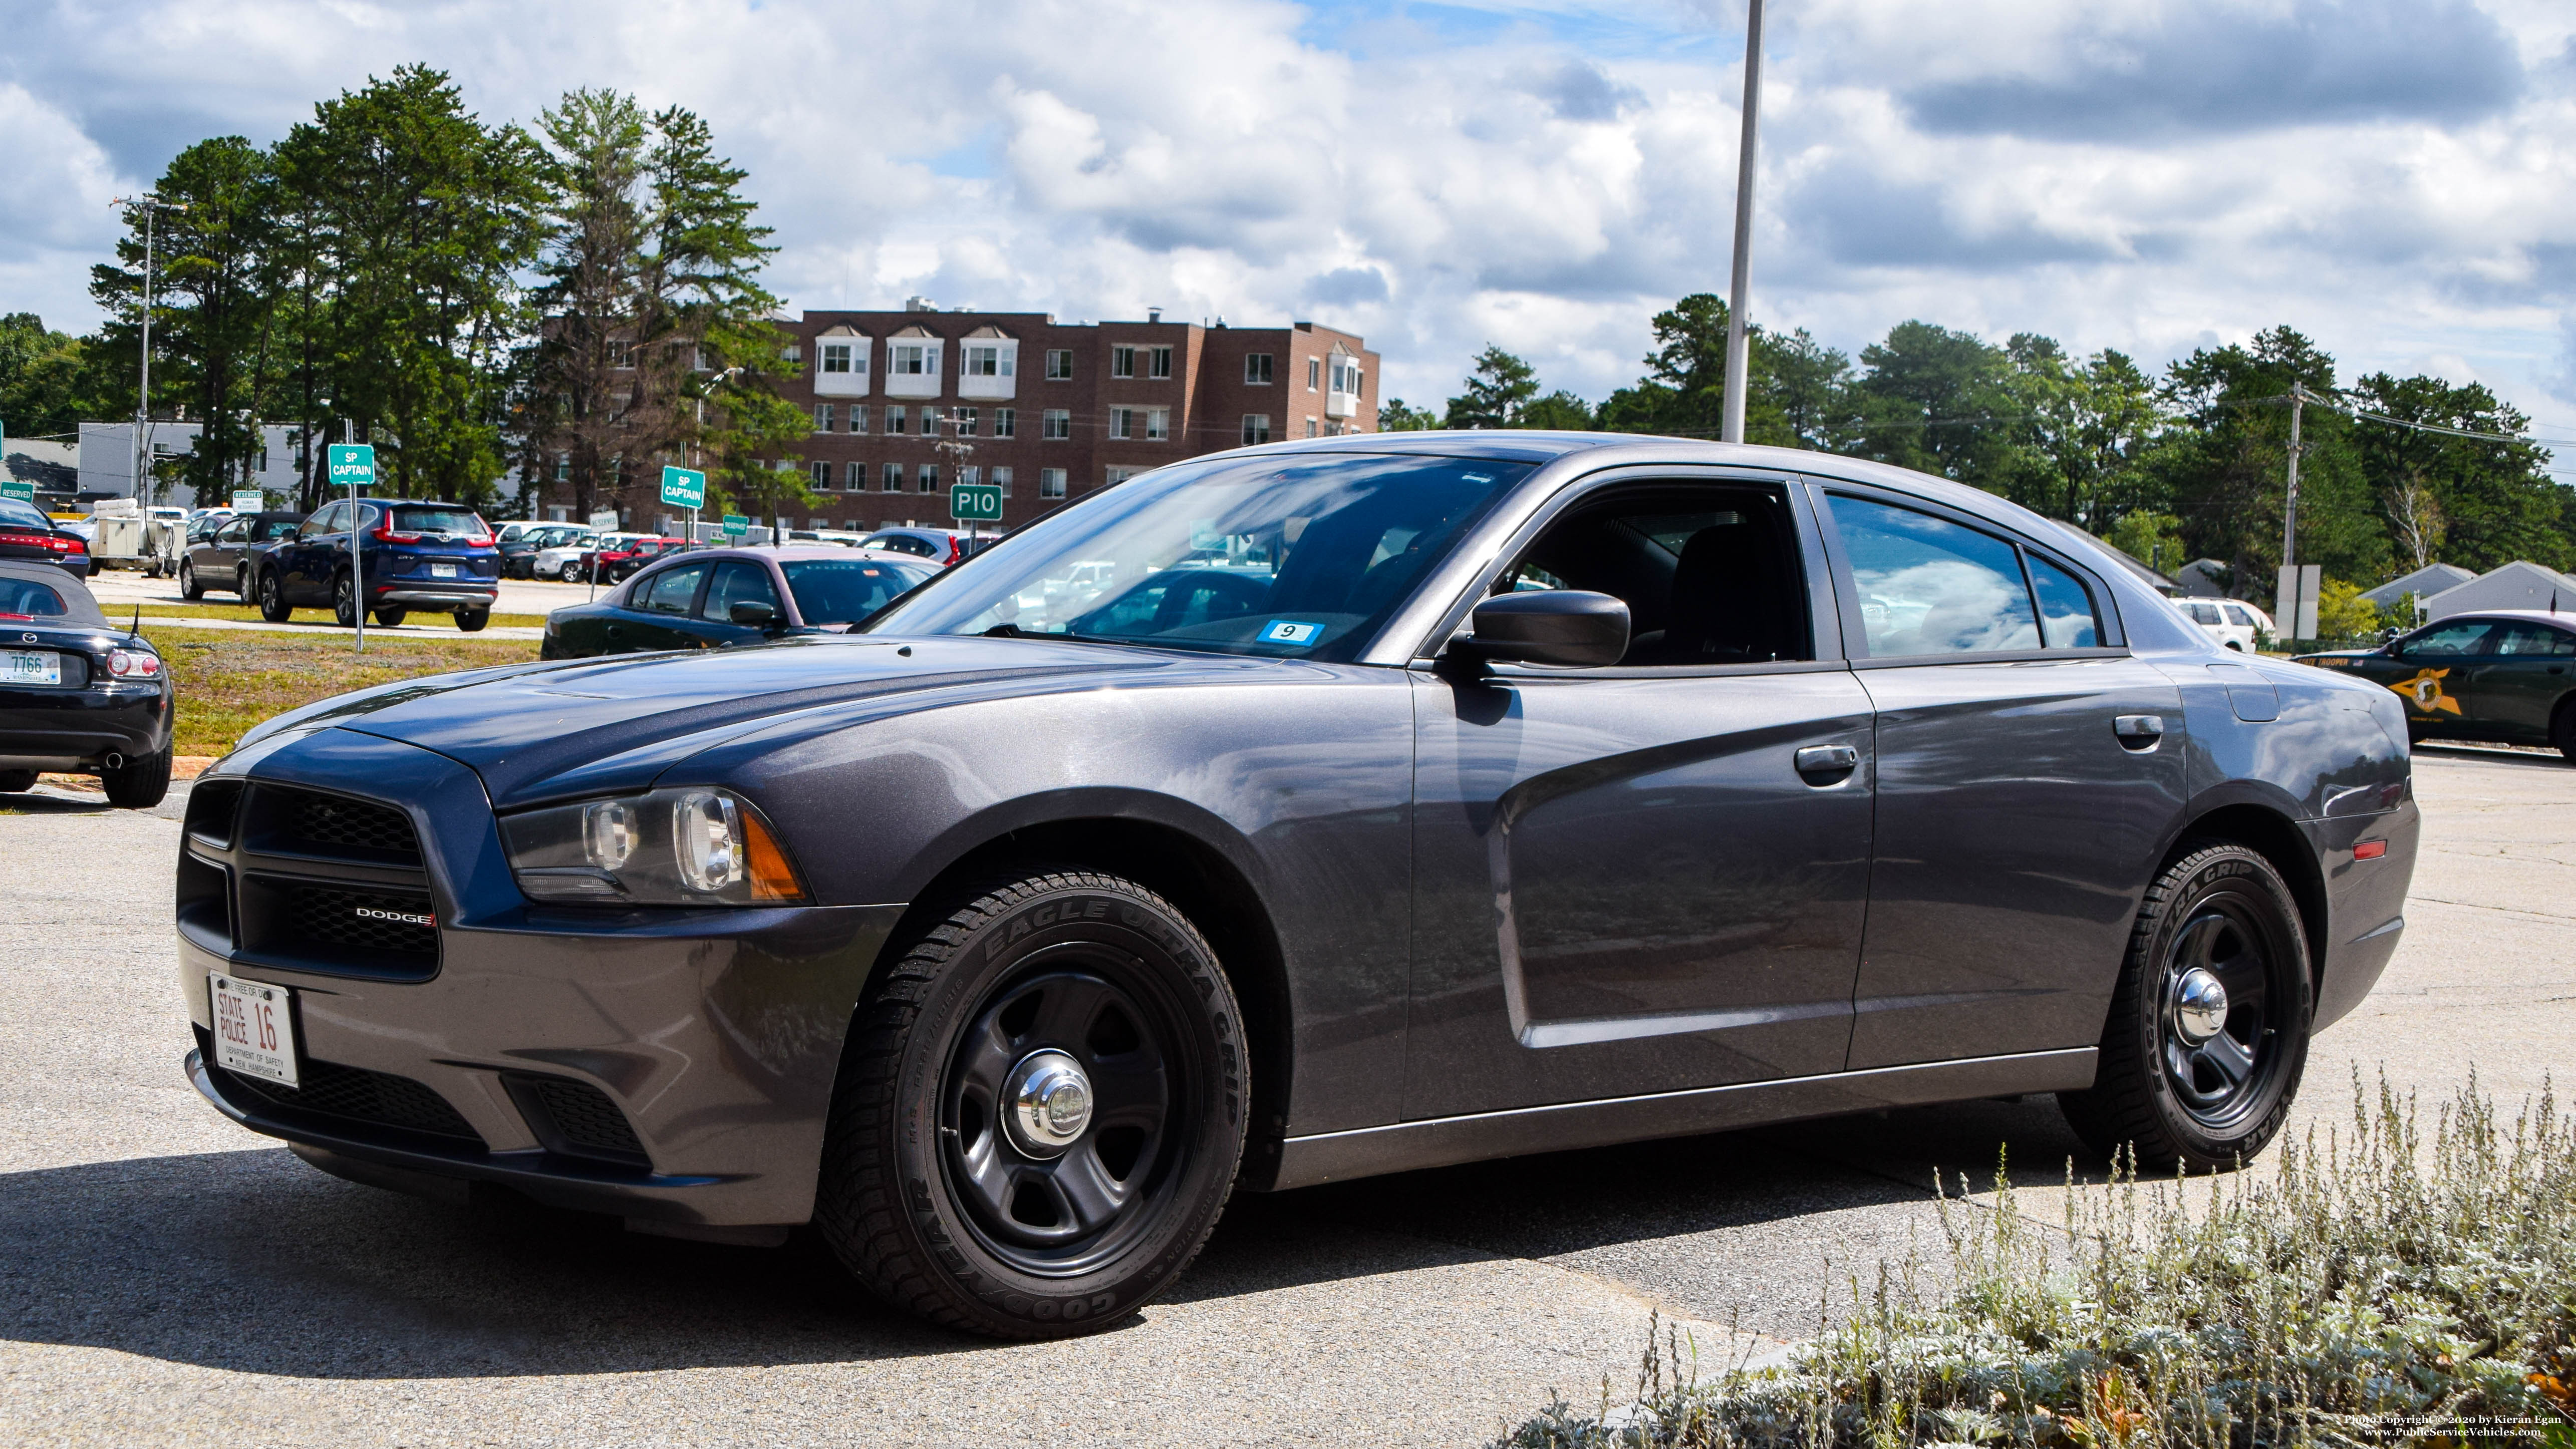 A photo  of New Hampshire State Police
            Cruiser 16, a 2011-2014 Dodge Charger             taken by Kieran Egan